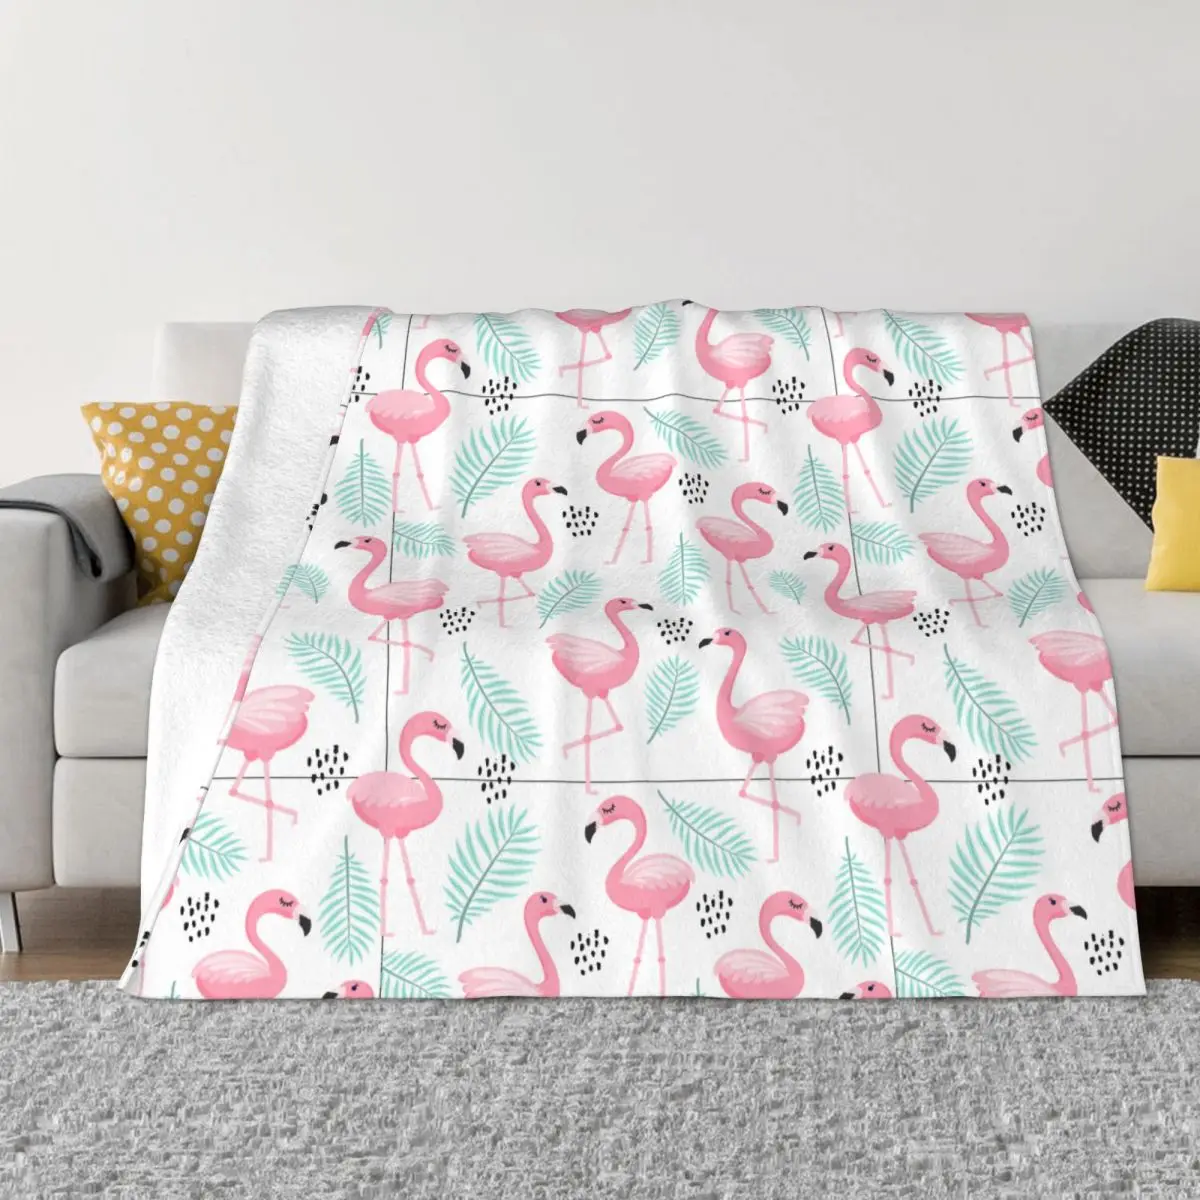 

Pink Flamingo Plaid Blankets Sofa Cover Coral Fleece Plush Print Animal Soft Throw Blanket for Home Bedroom Plush Thin Quilt